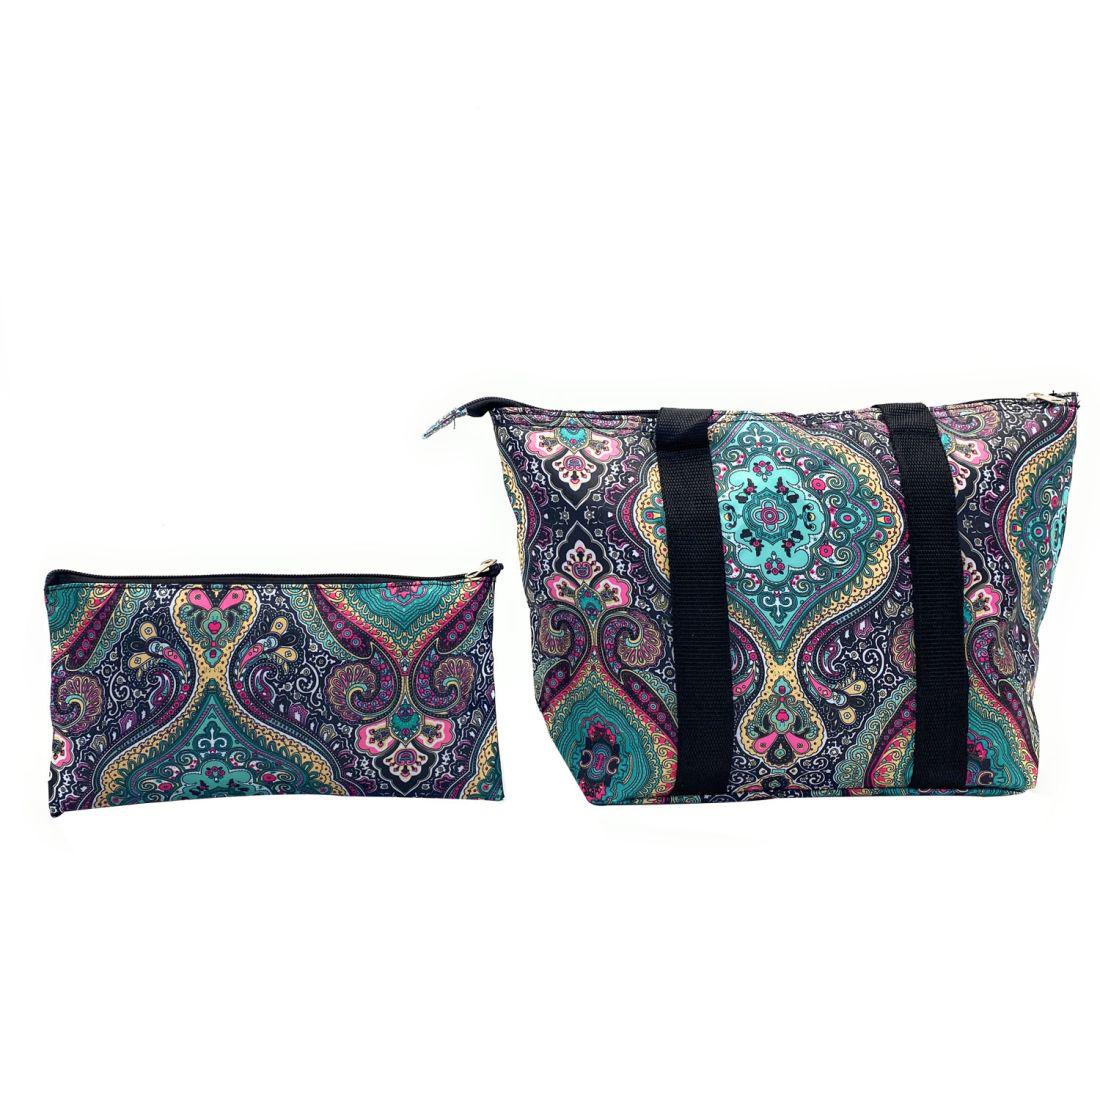 Empire Cove Womens 2 Piece Gift Set Paisley Insulated Lunch Bag Cooler Cosmetic Bag